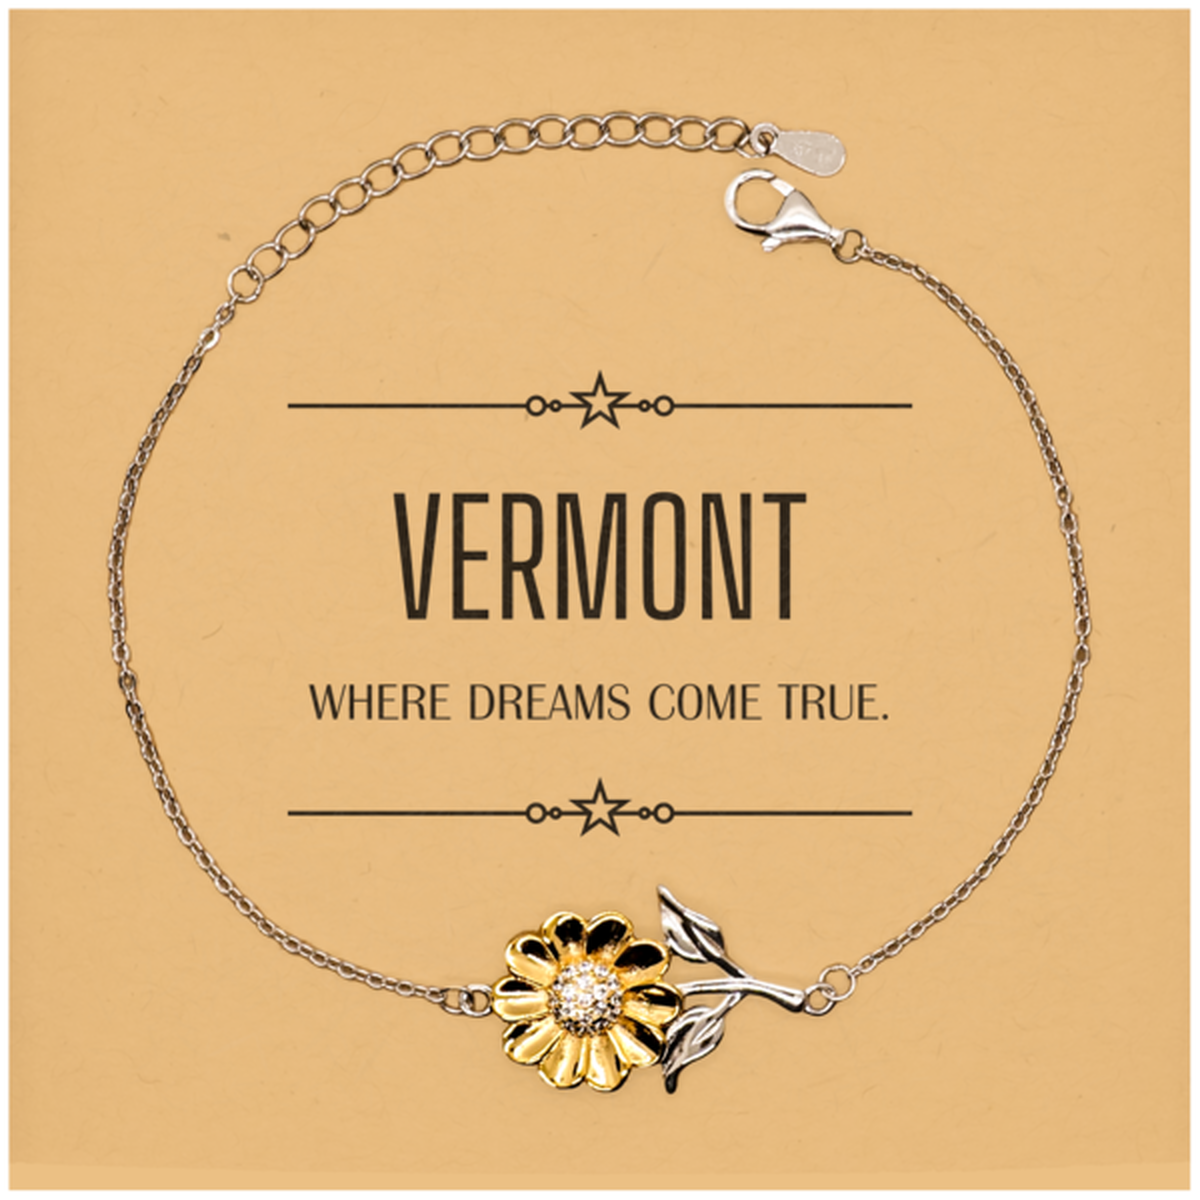 Love Vermont State Sunflower Bracelet, Vermont Where dreams come true, Birthday Christmas Inspirational Gifts For Vermont Men, Women, Friends